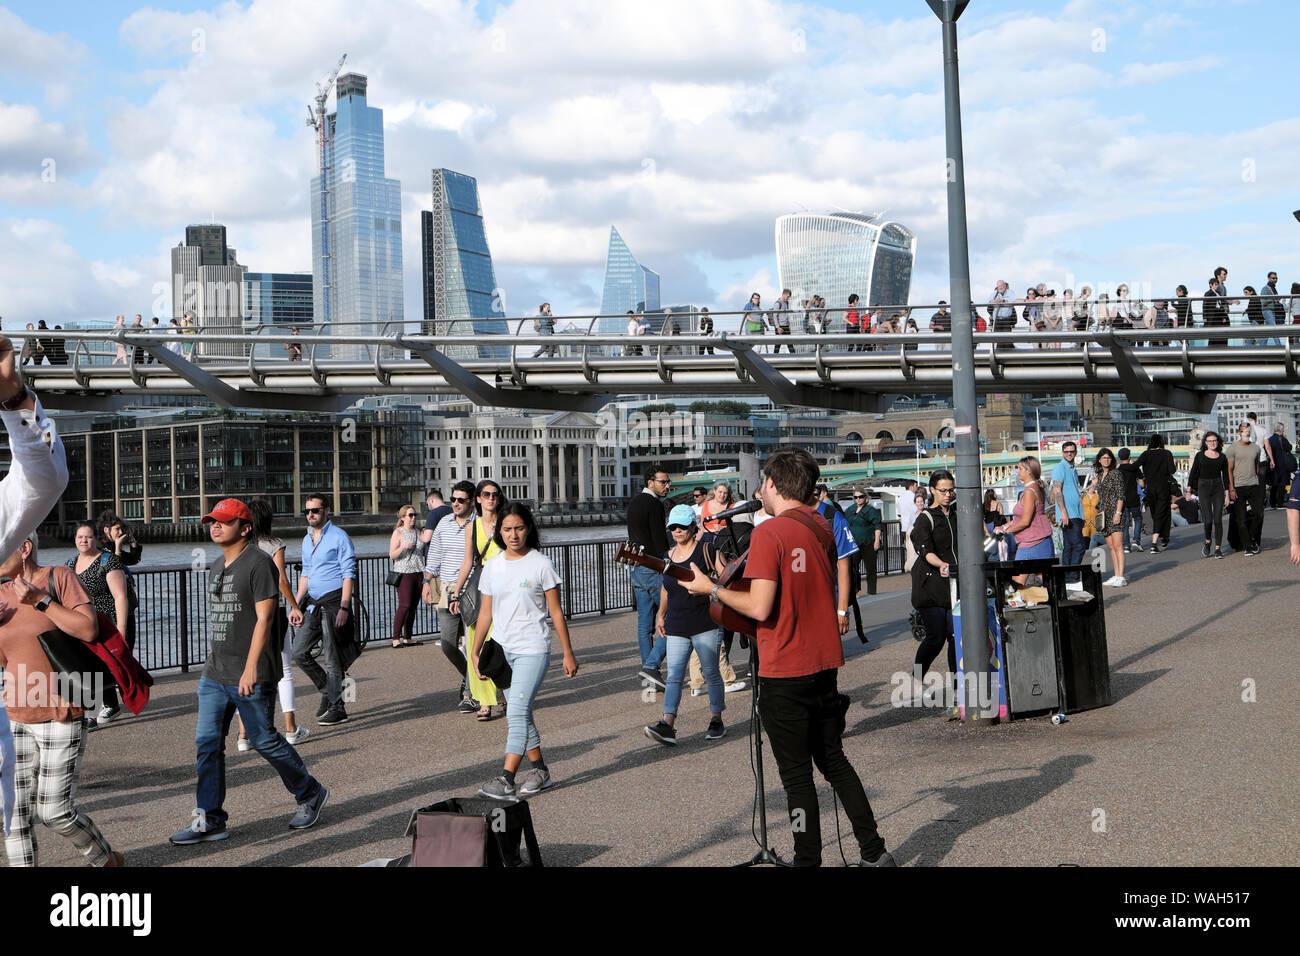 Tourists walking along street & busker busking outside the Tate Modern Art Gallery Bankside with view of City of London England UK  KATHY DEWITT Stock Photo